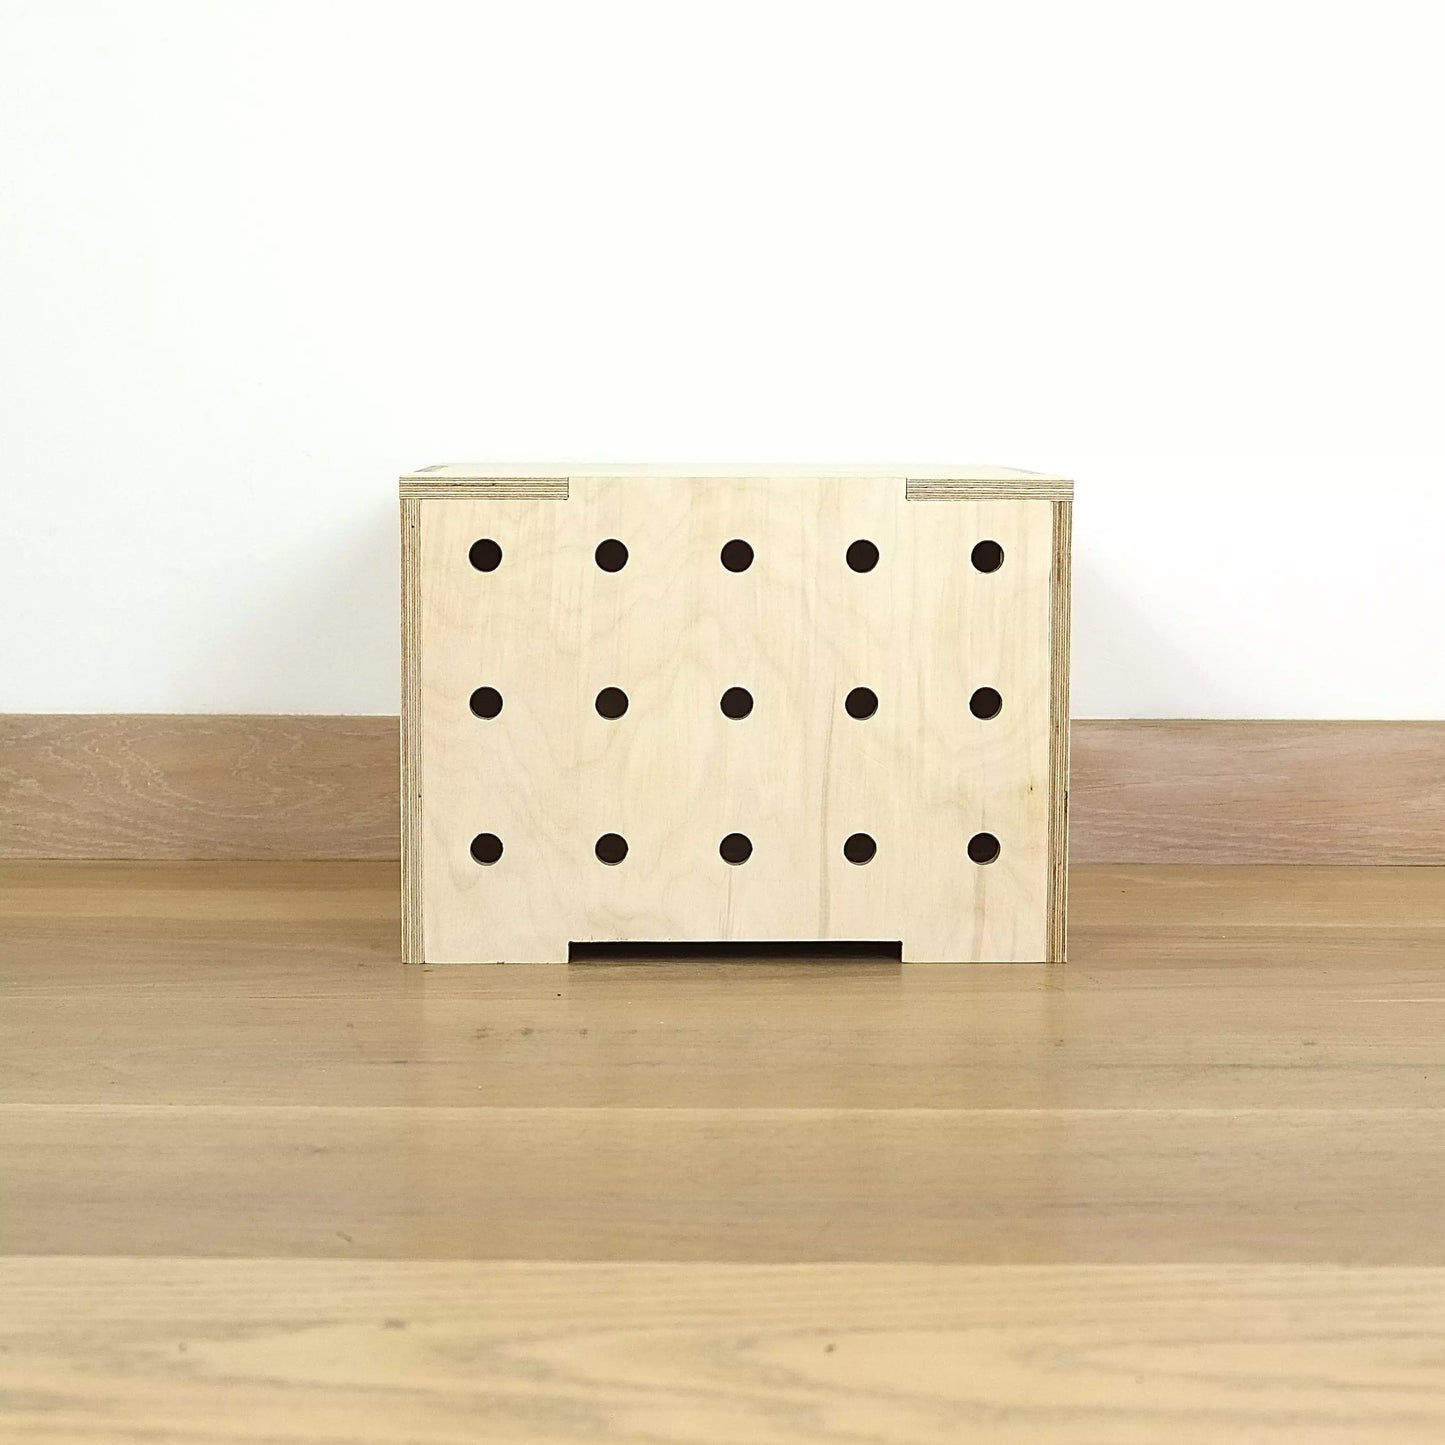 A simple pale wooden square shaped storage crate facing front on, with three rows of holes cut in the front facet and a wooden lid, sitting on a wooden floor.